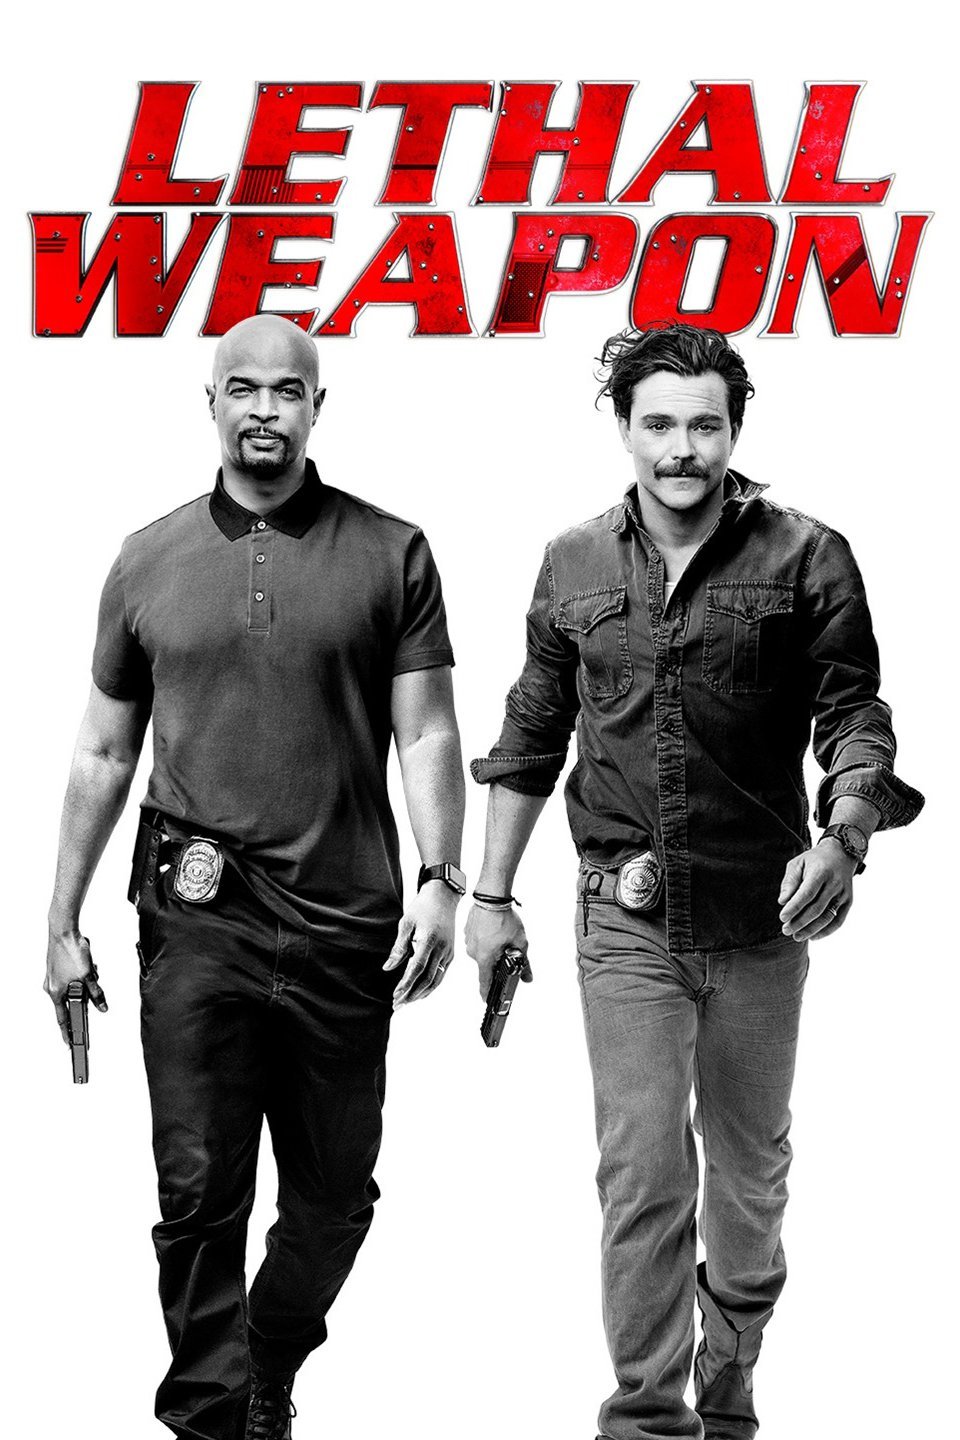 Lethal Weapon FOX - When Captain Avery says enough, he means it